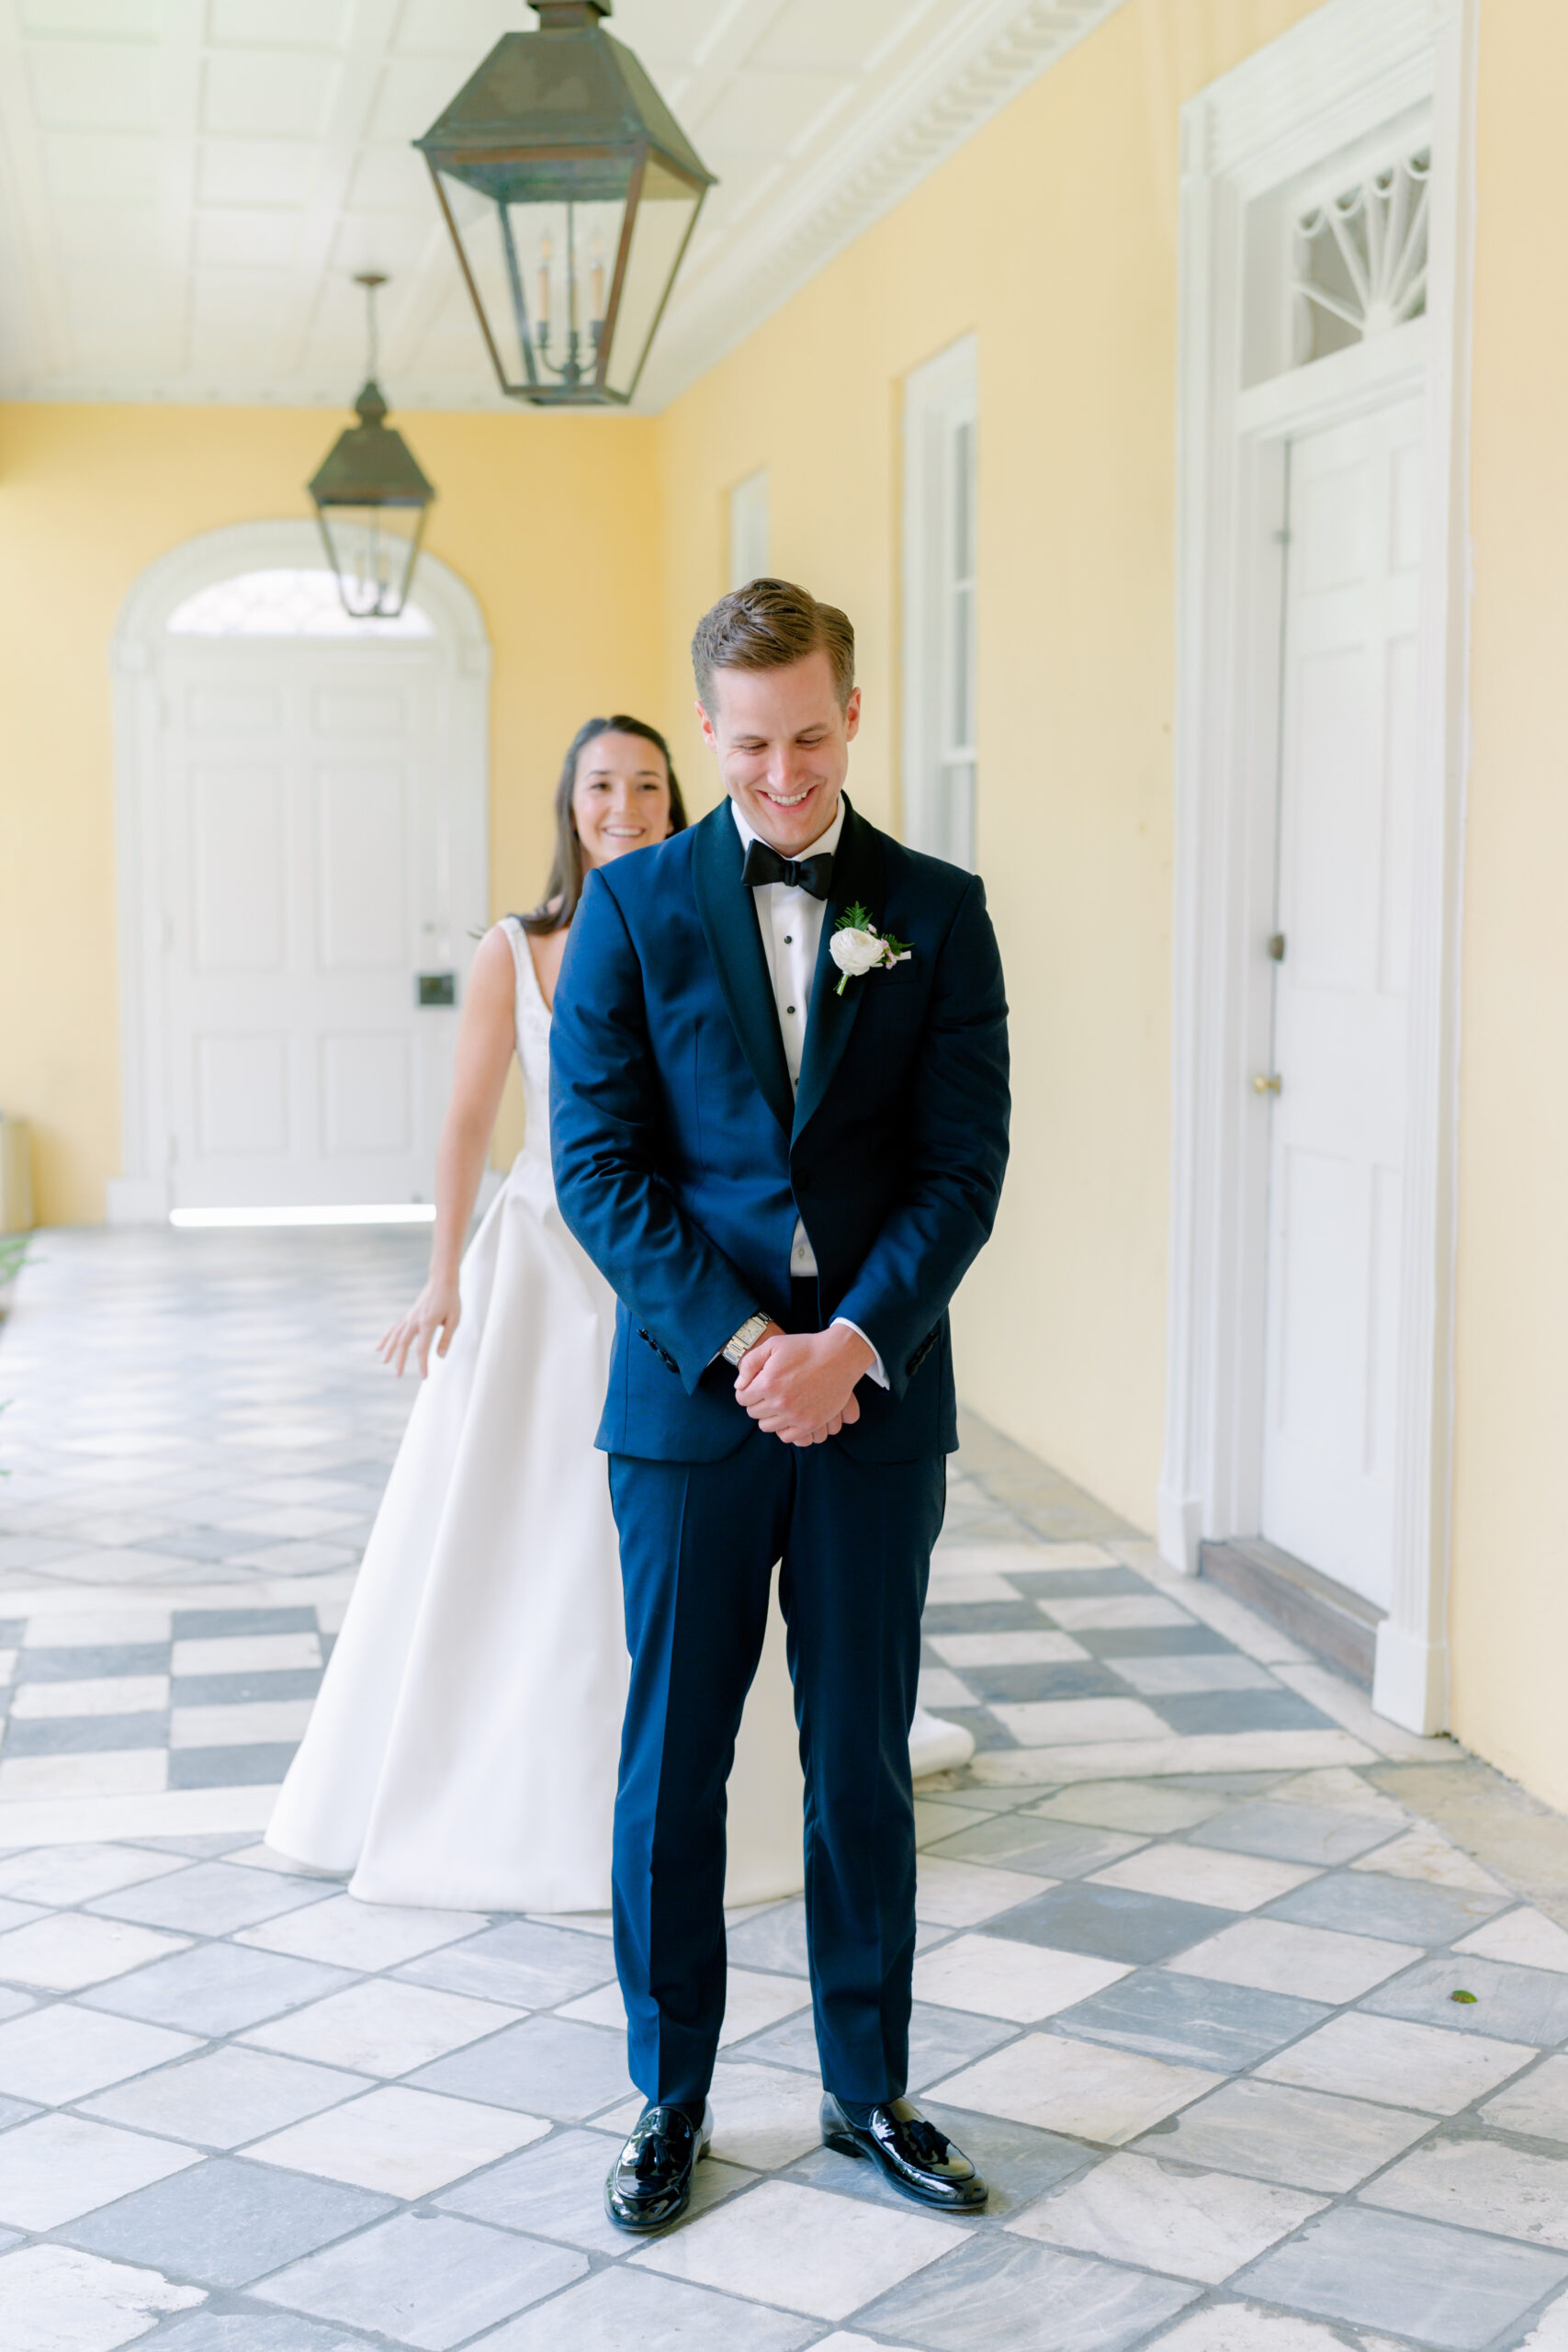 Bride and groom first look at William Aiken House. yellow walls and checkerboard floor.